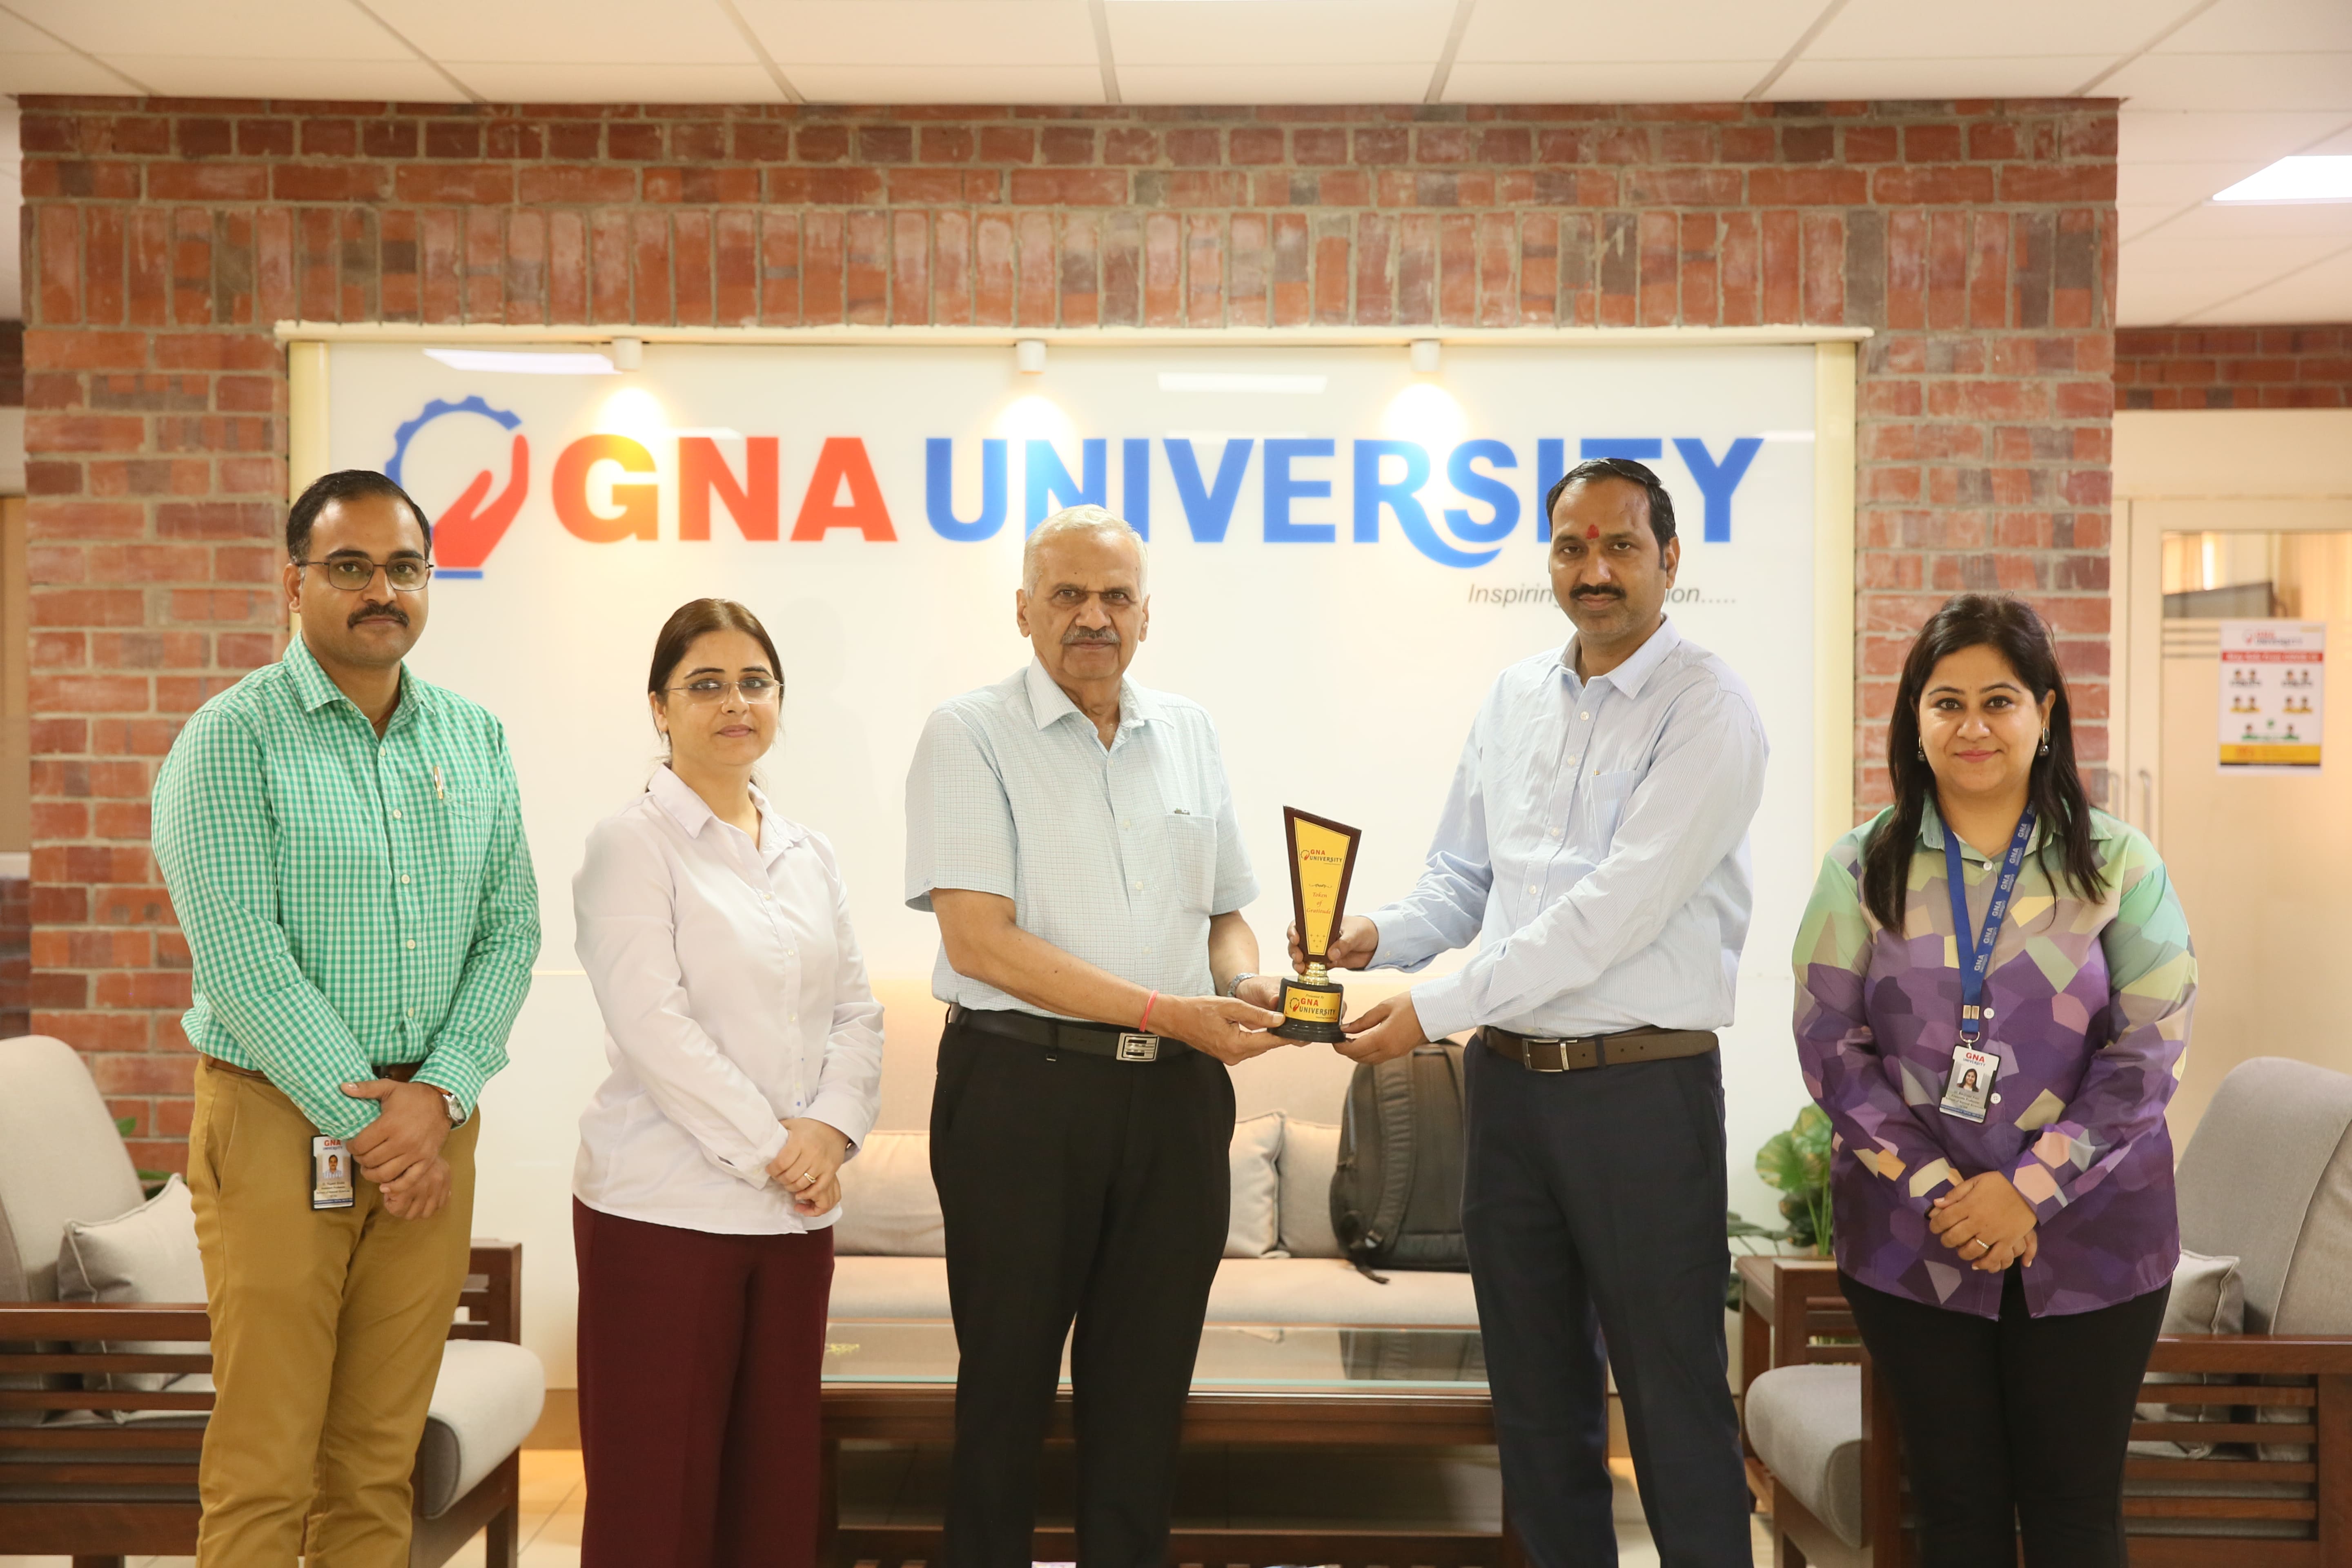 Guest Lecture on ‘Innovation and Technological Advancements of Optical Fiber Communication’ @ GNA University